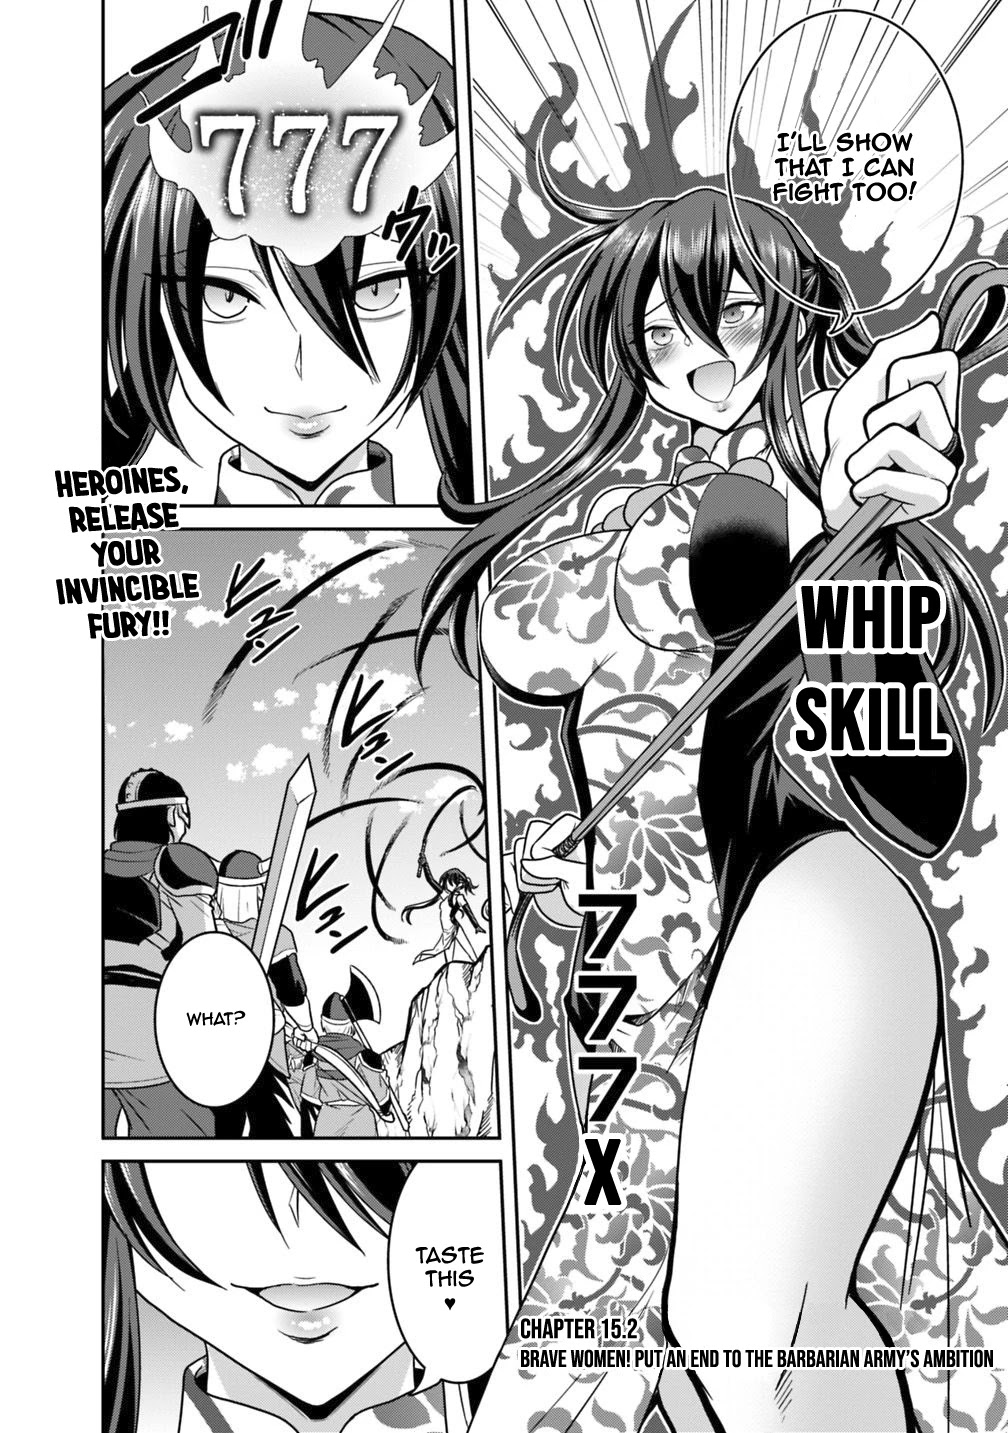 Kujibiki Tokushou Musou Harem-Ken Chapter 15.1 - 15.2: Brave Women! Put An End To The Barbarian Army's Ambition! Part I - Picture 2